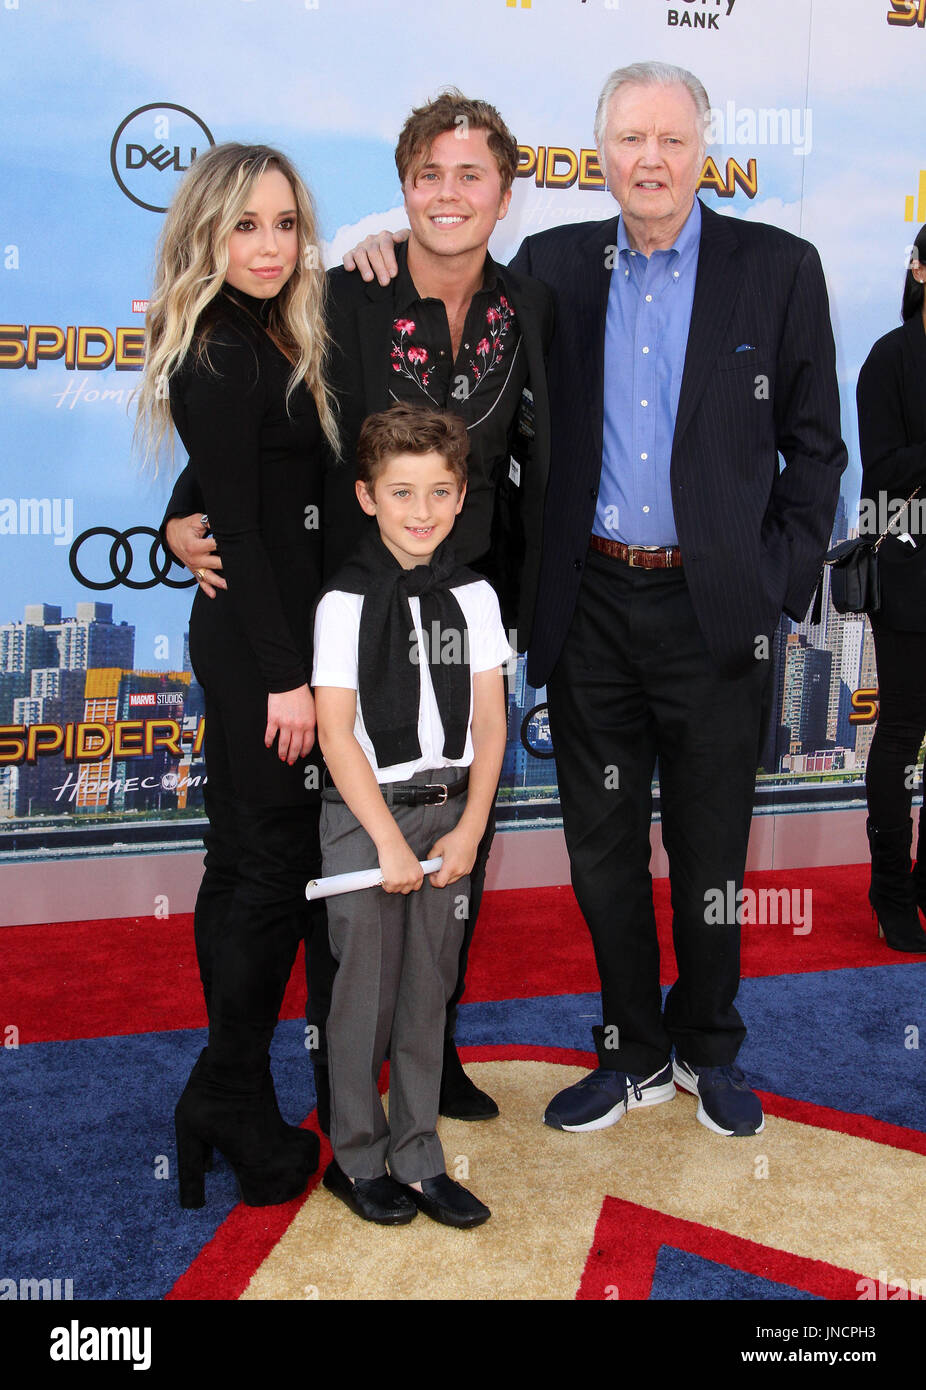 Los Angeles premiere of 'Spider-Man: Homecoming' held at the TCL Chinese Theatre - Arrivals  Featuring: Jon Voight, grandson, goddaughter Skyler Shaye, Christian Lopez Where: Los Angeles, California, United States When: 28 Jun 2017 Credit: Adriana M. Barraza/WENN.com Stock Photo